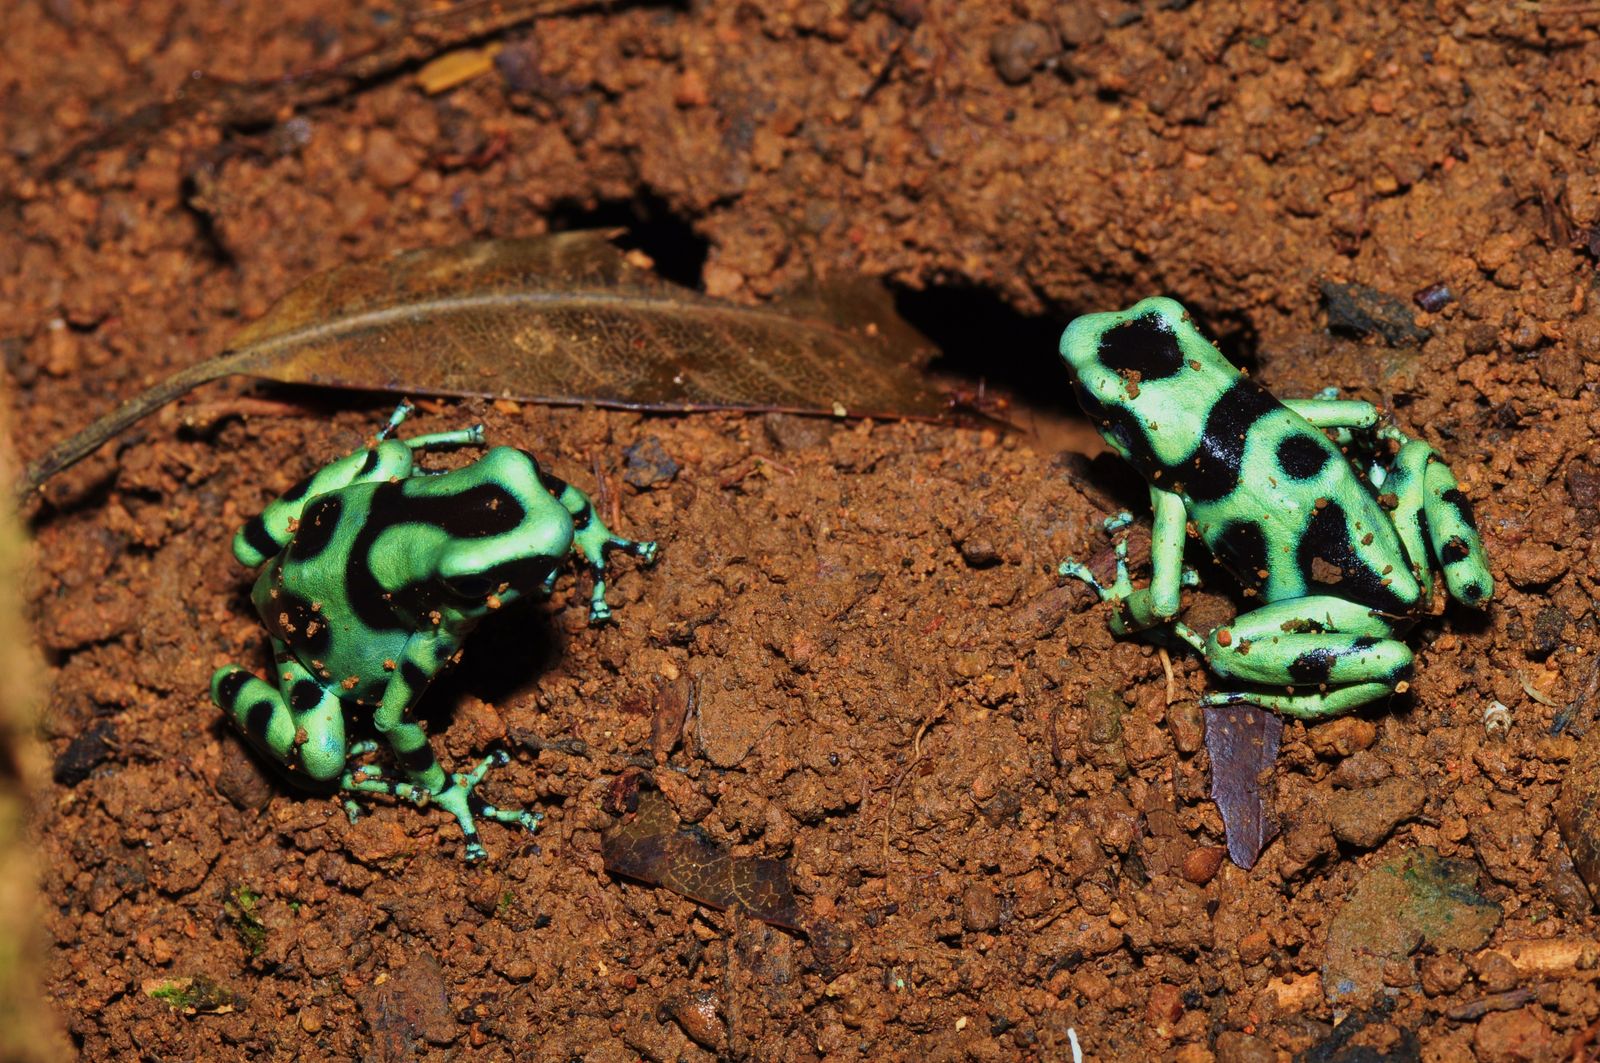 Why Do Poison Dart Frogs 'Tap Dance' With Their Toes? Research